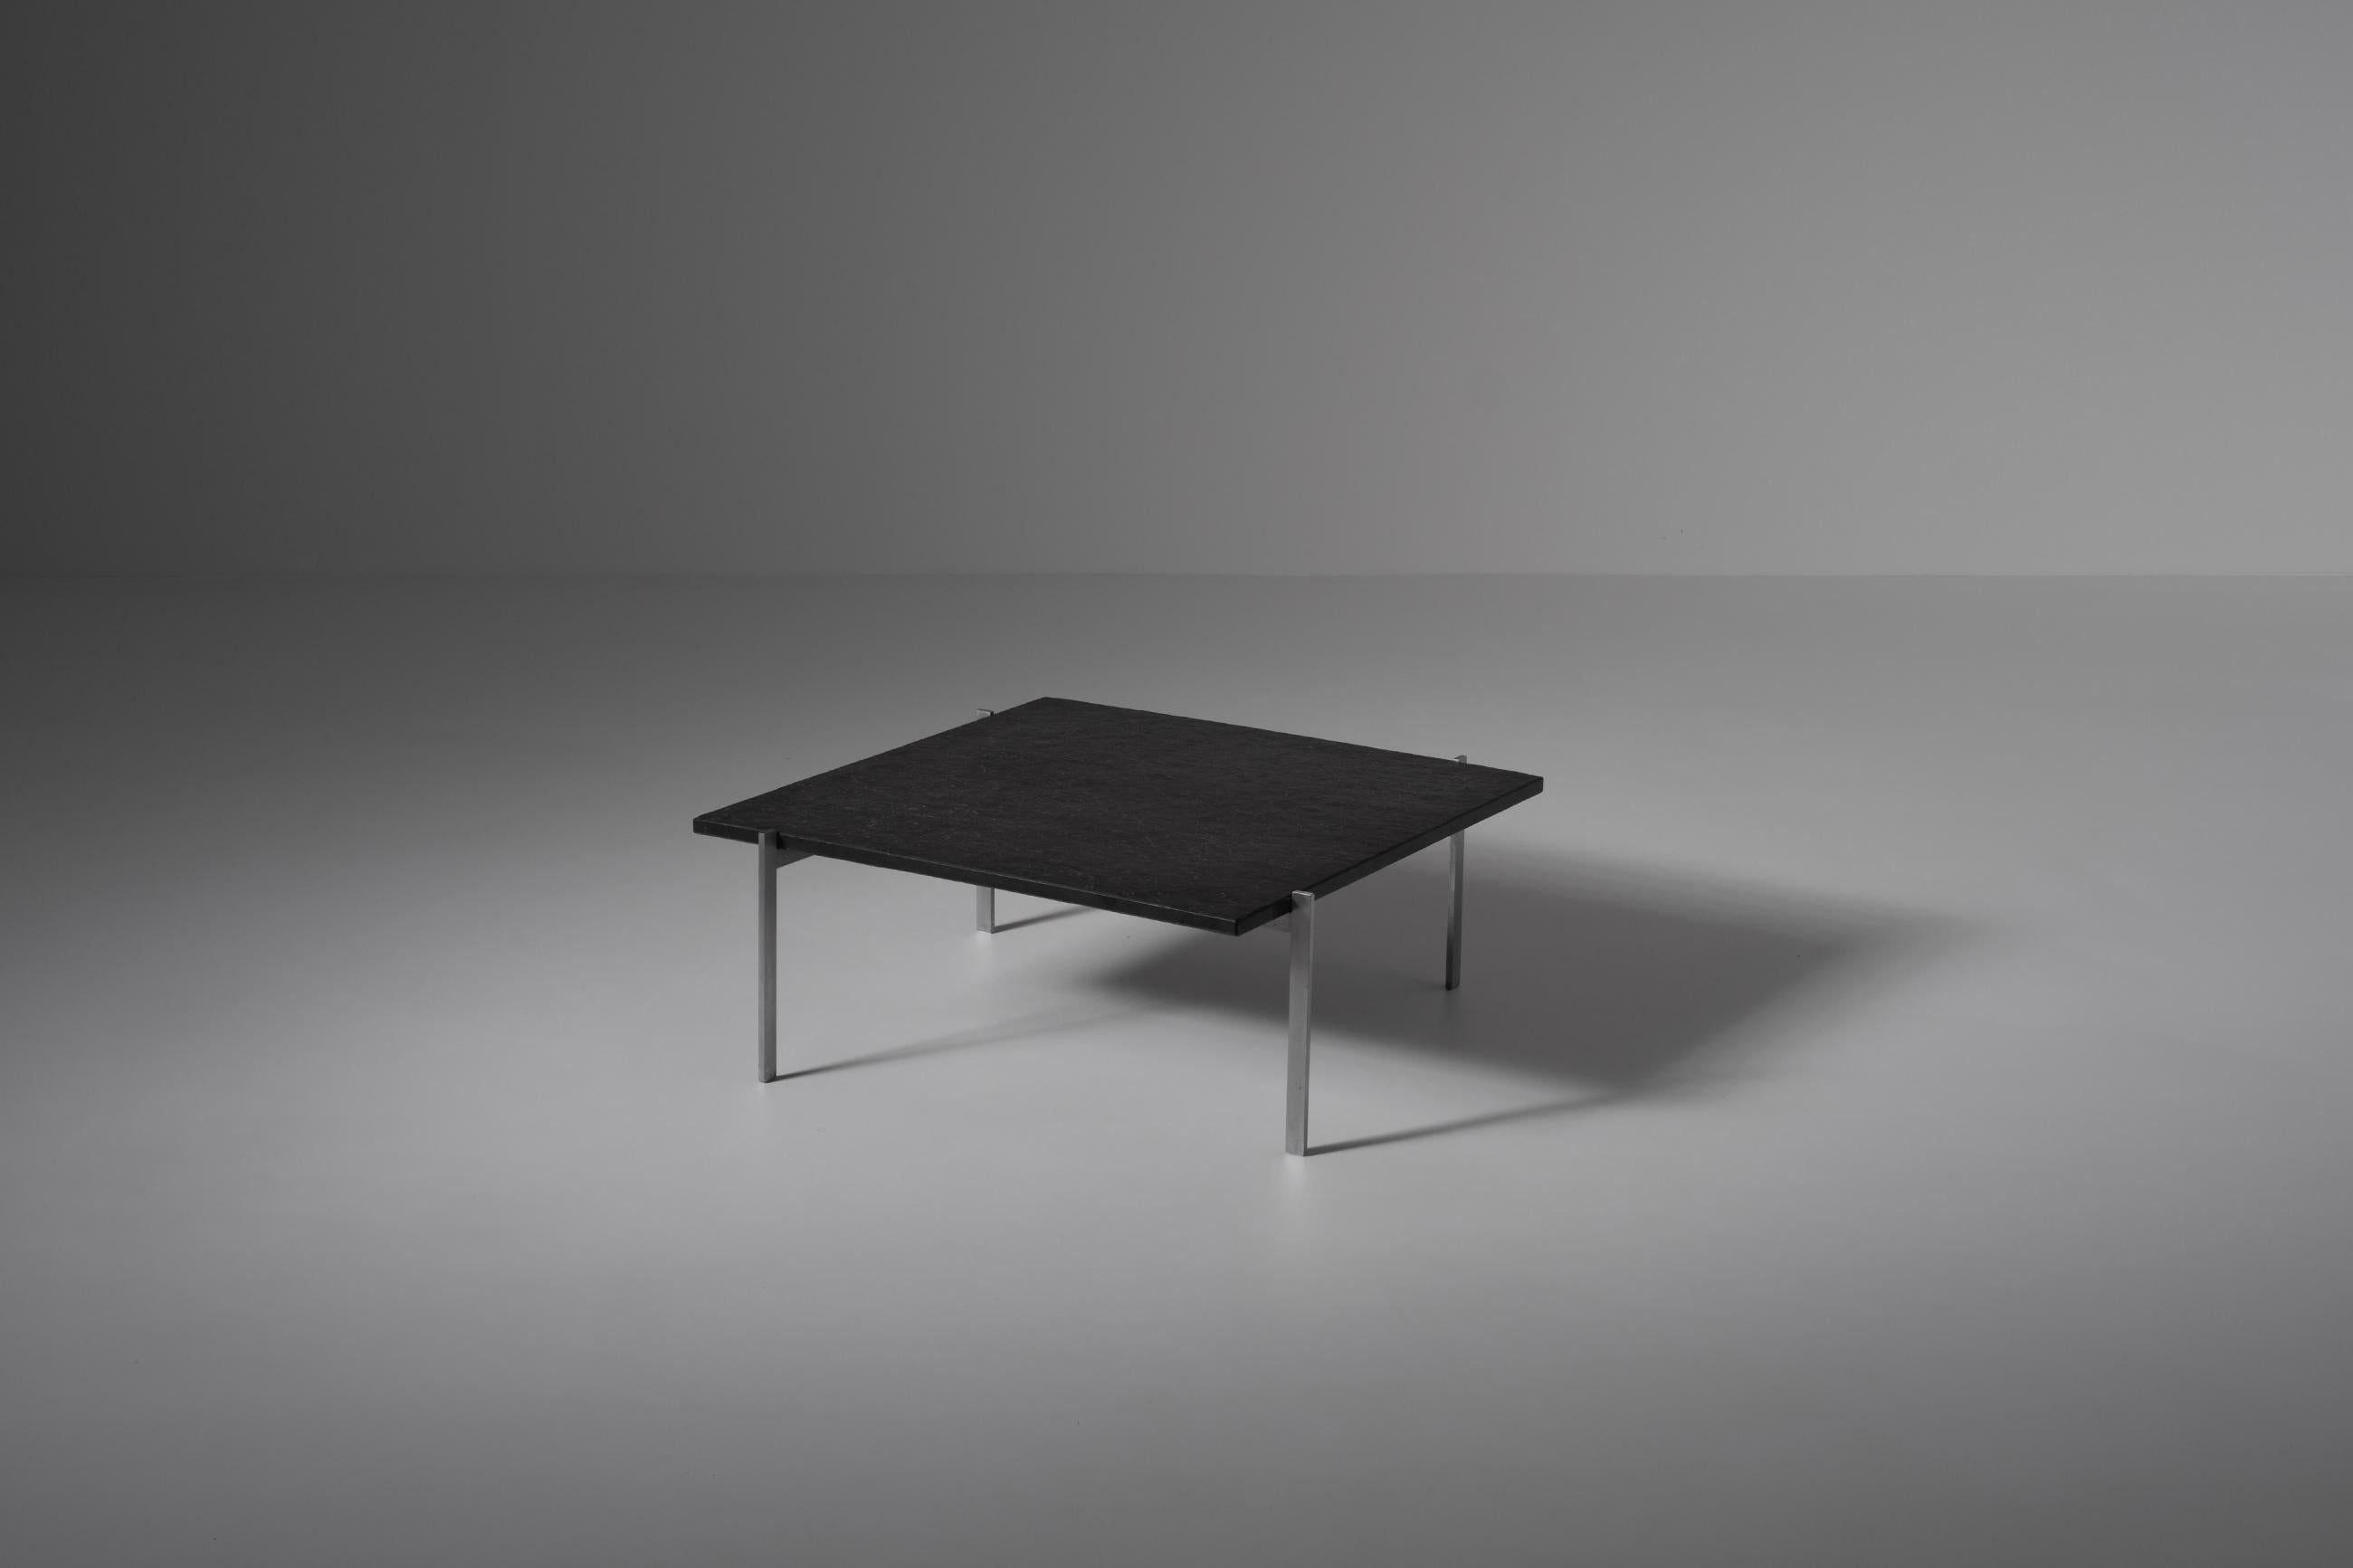 Iconic PK61 coffee table by Poul Kjaerhom for Ejvind Kold Christensen (E. Kold Christensen), Denmark 1956. Minimal yet refined sophisticated design, a true Classic. The original graphithe colored slate top is in our opinion the best options for this